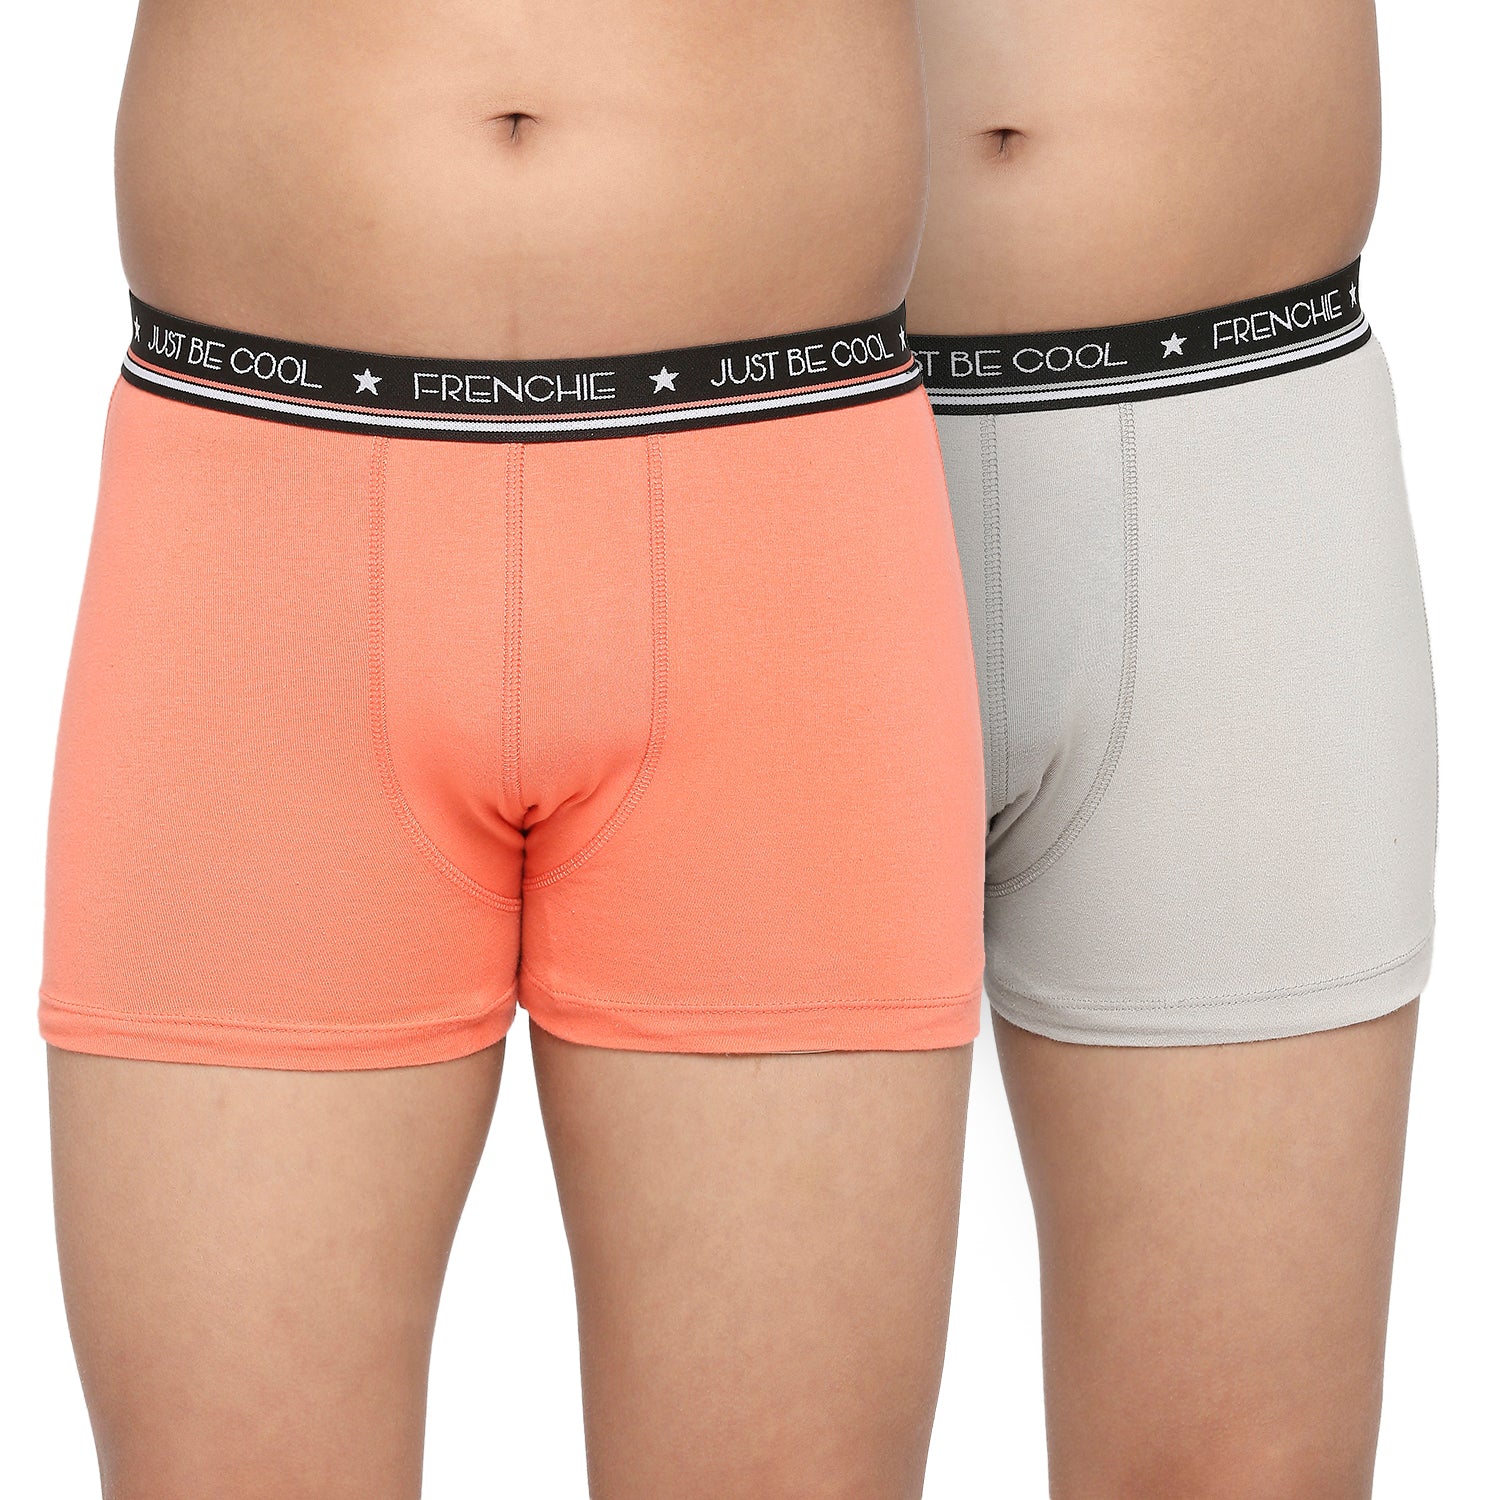 FRENCHIE Teenagers Cotton Brief Blue and Dark Gray - Pack of 2